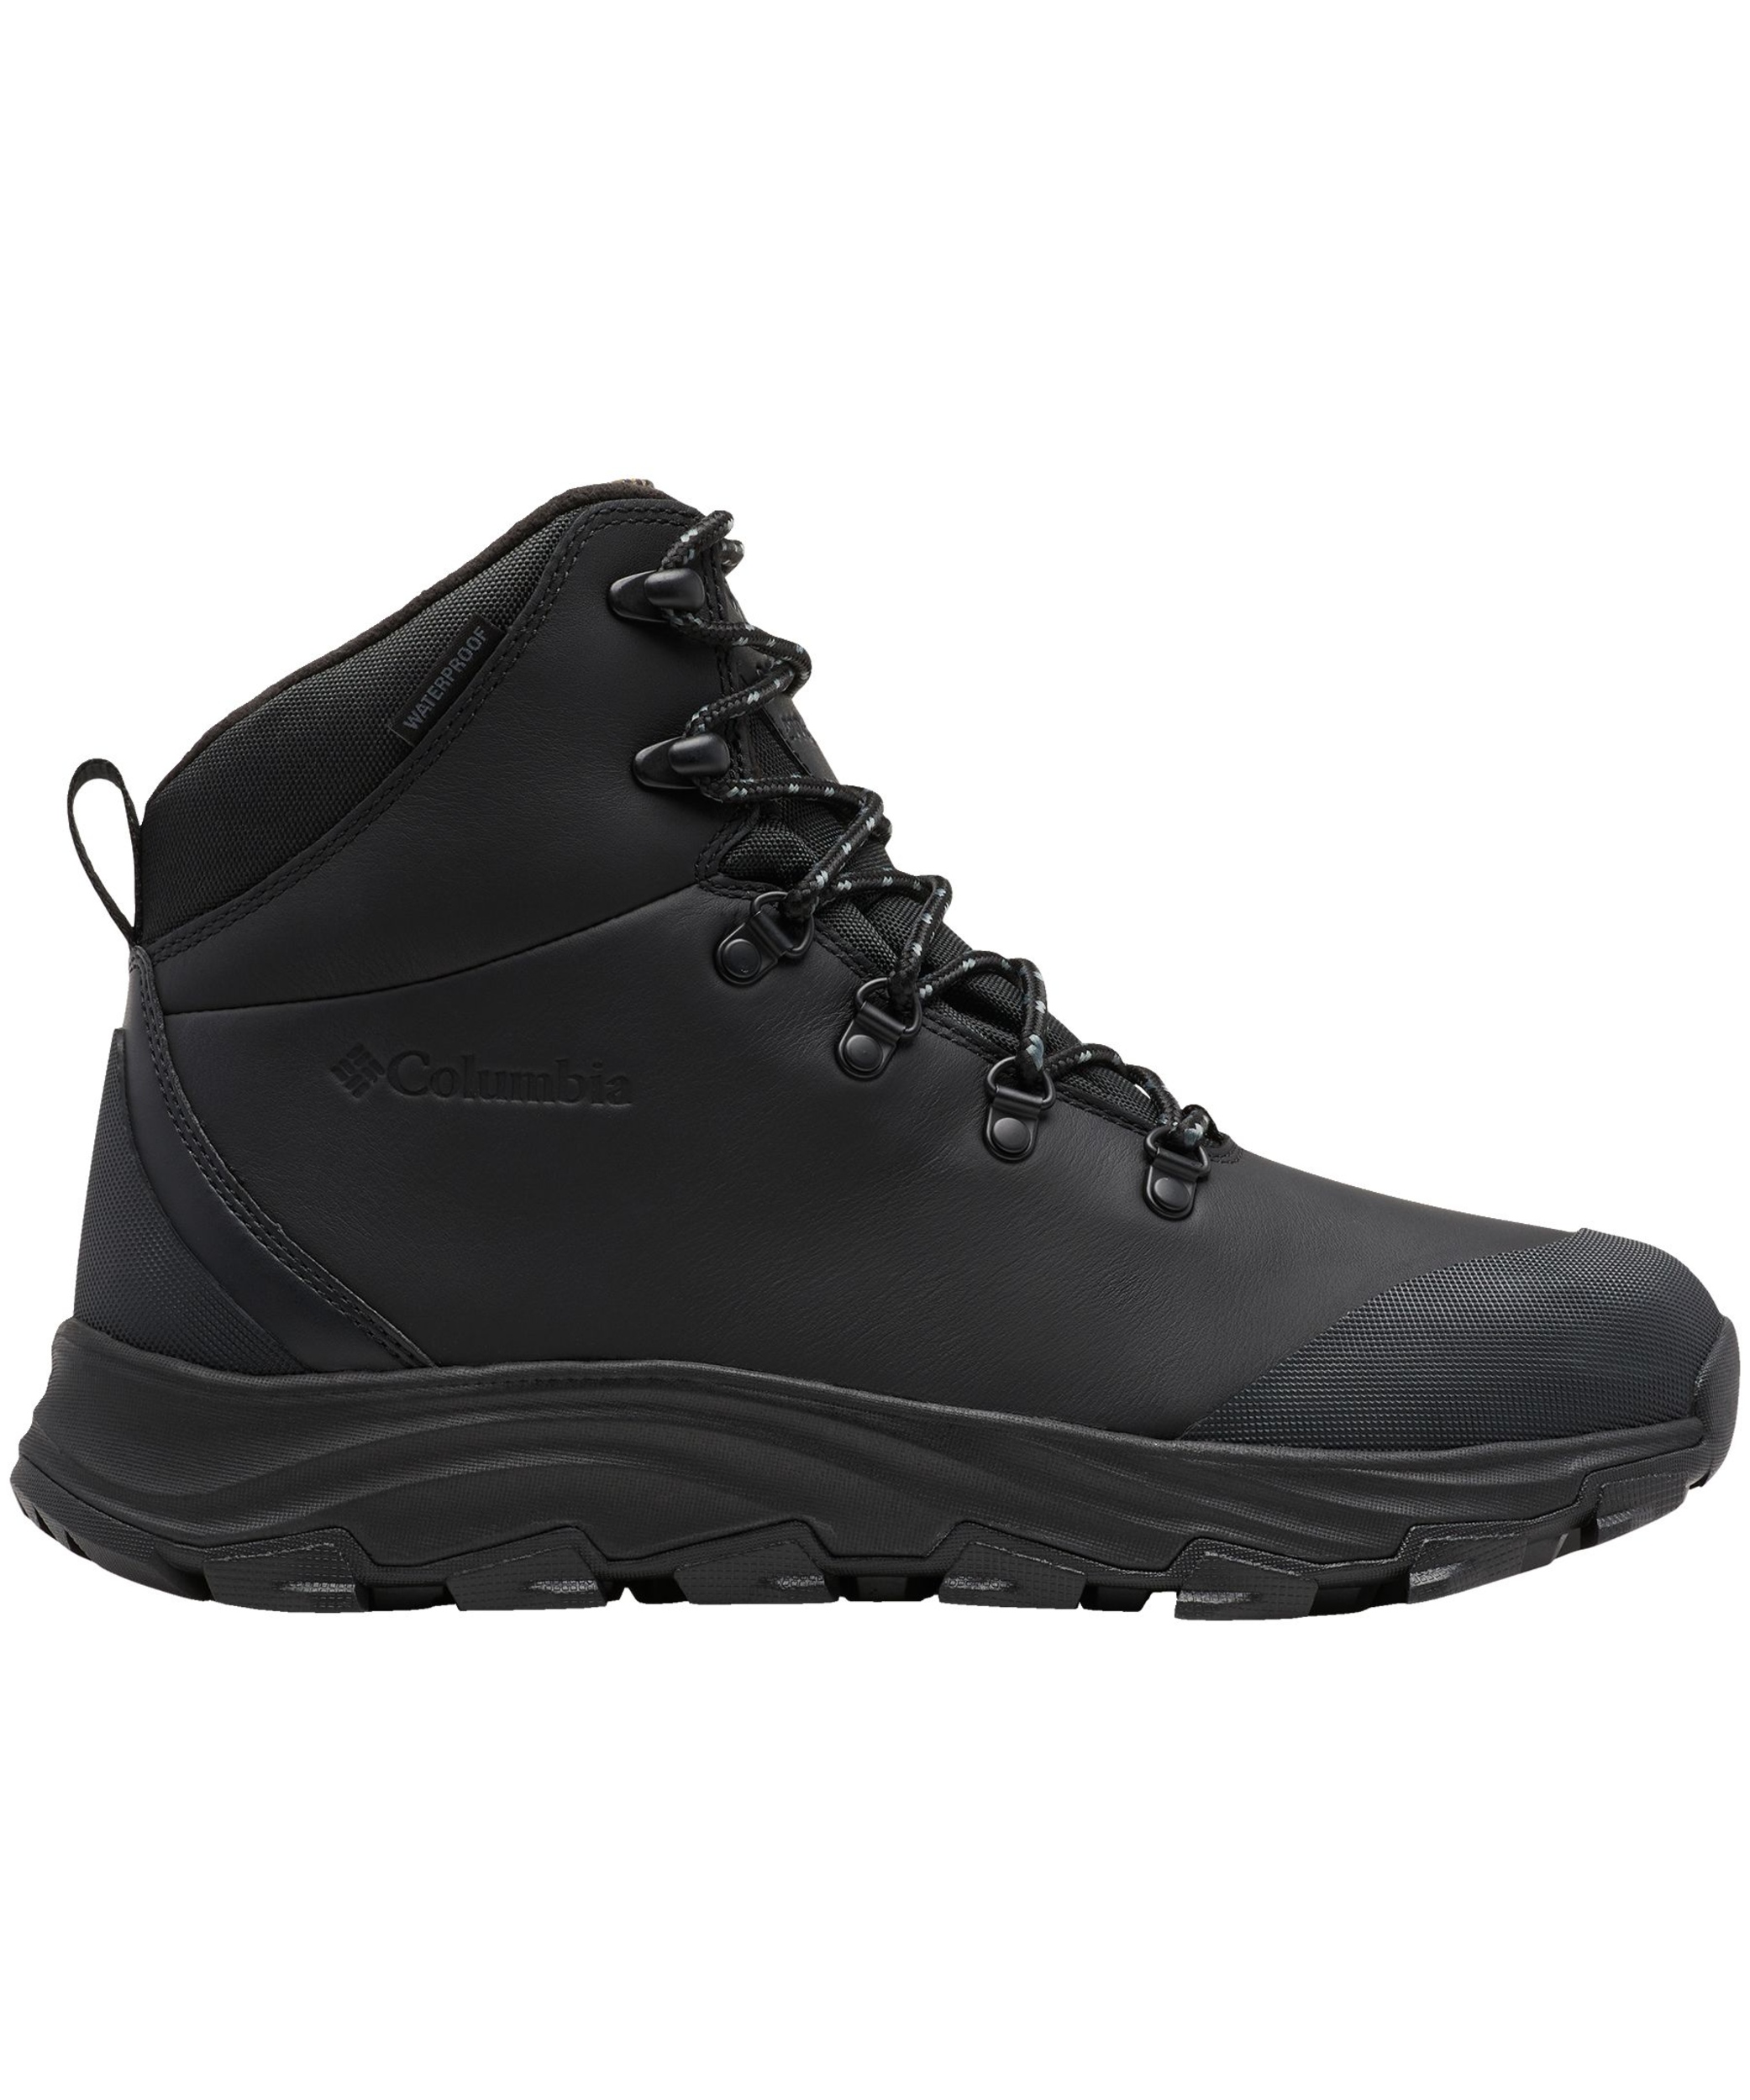 Columbia Columbia Men's Expeditionist Waterproof Leather Winter Boots ...